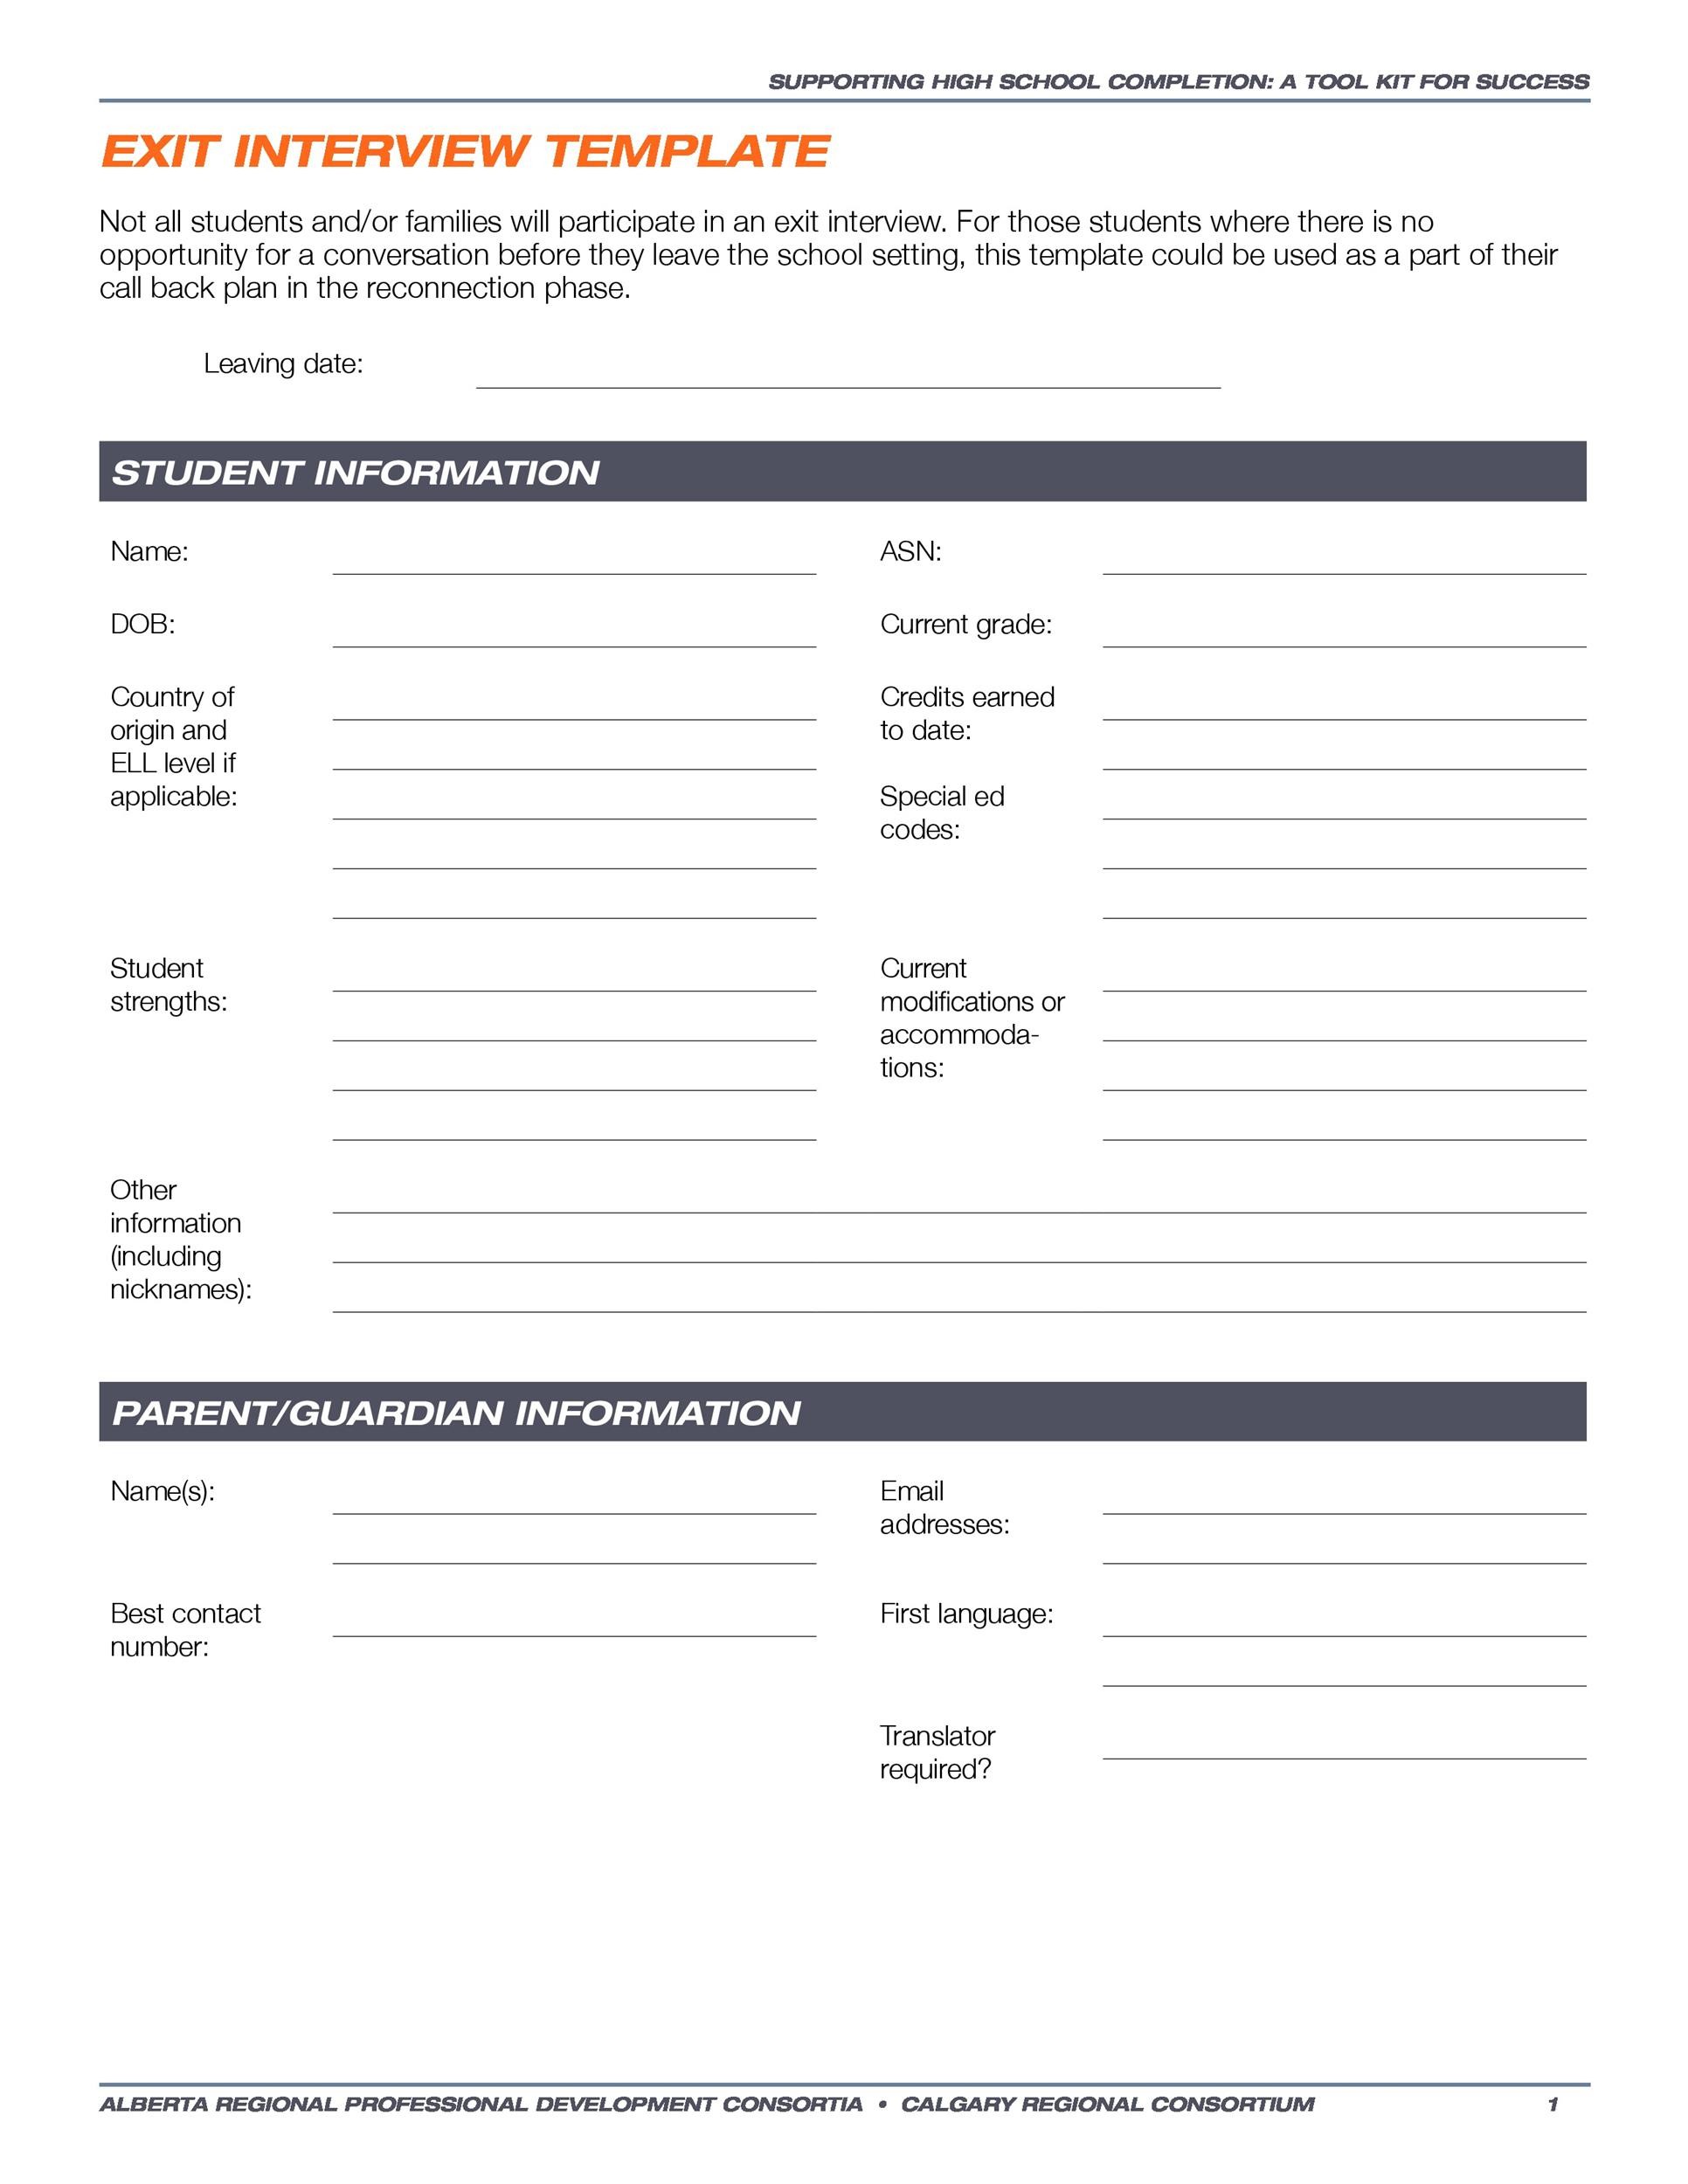 Free exit interview template 34